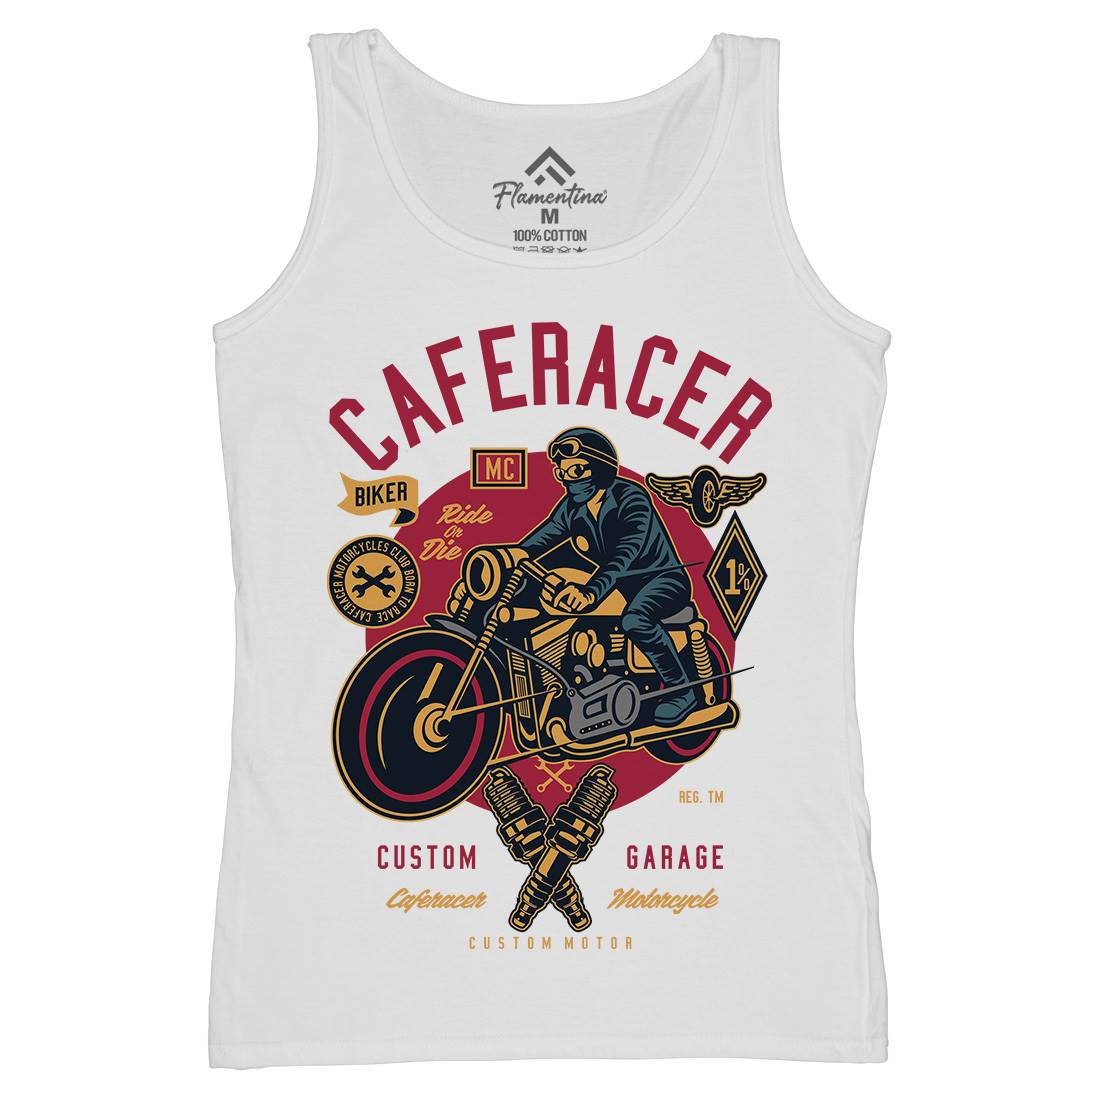 Caferacer Womens Organic Tank Top Vest Motorcycles D513